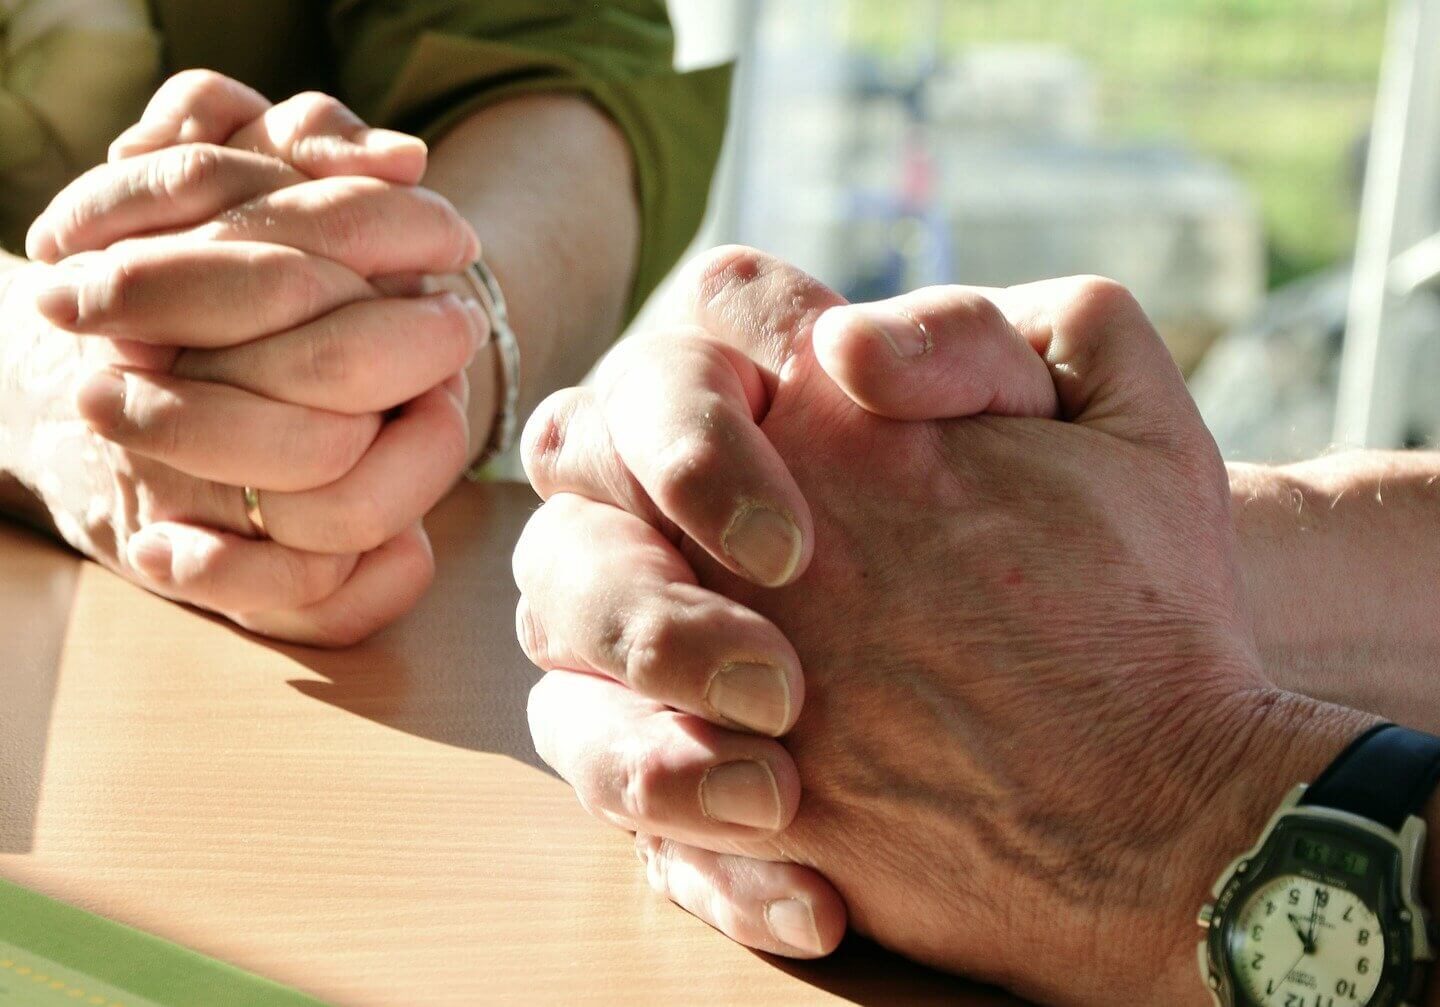 A close-up image of a couple’s praying hands